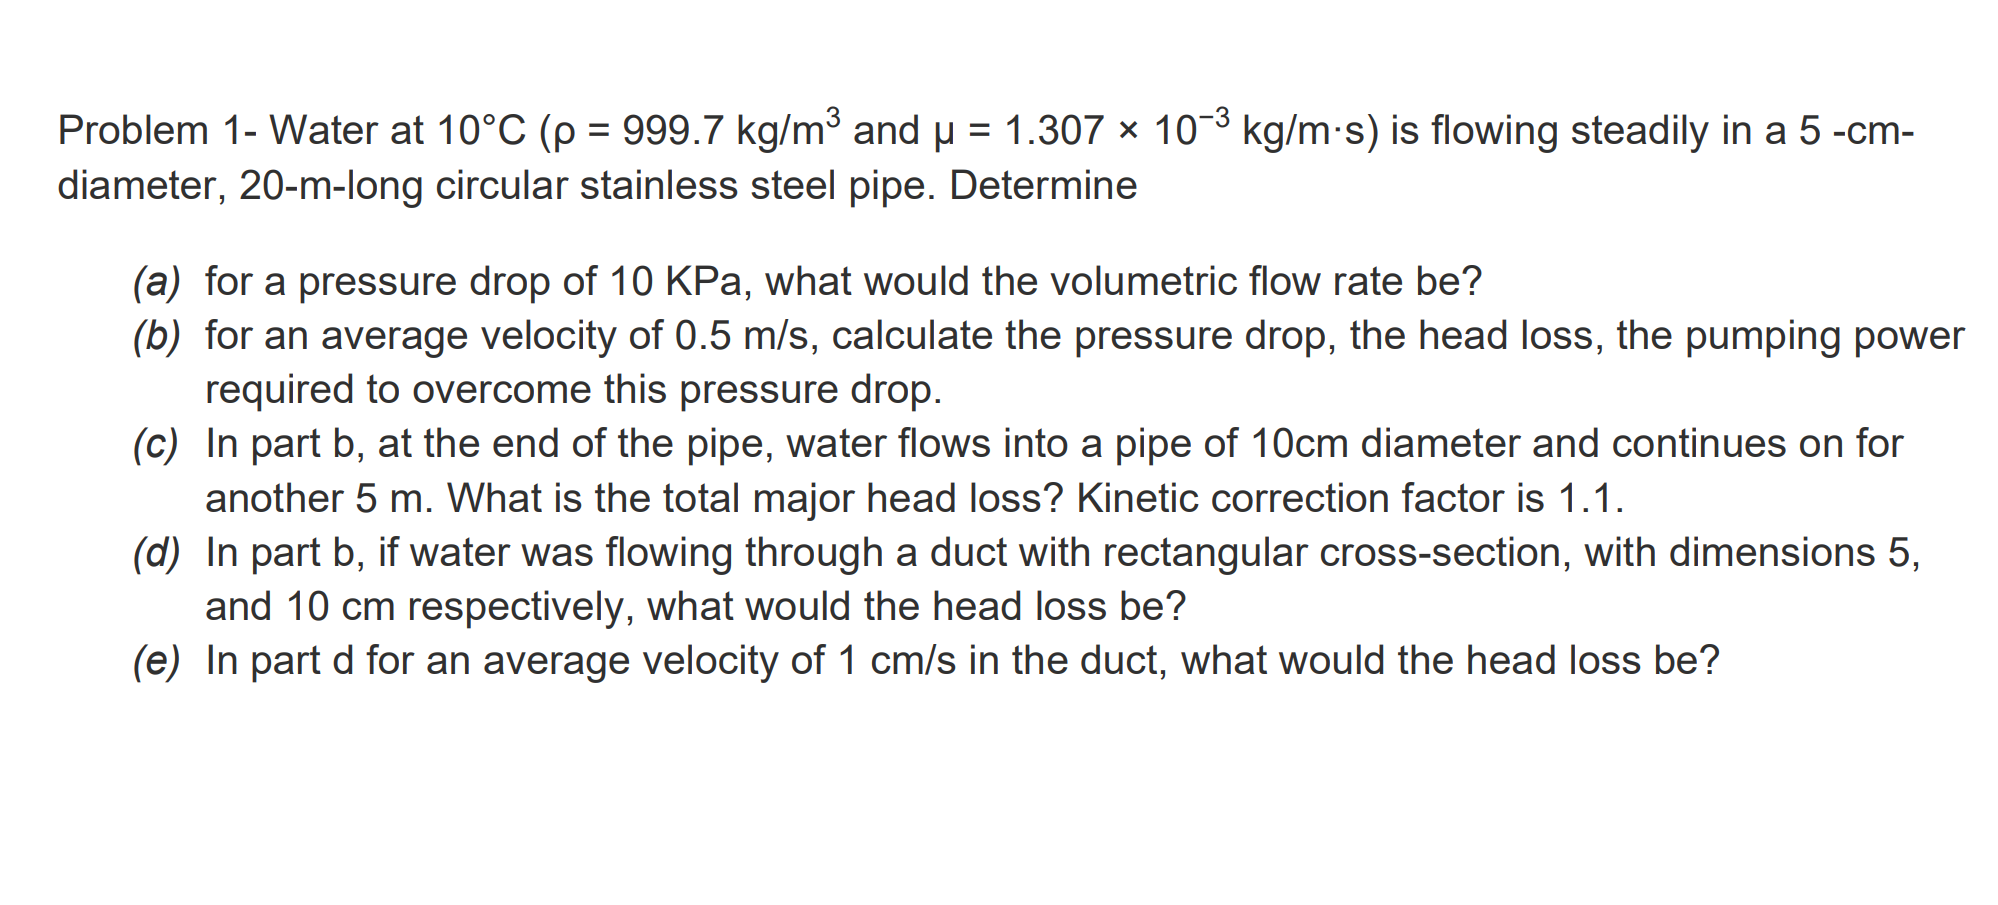 Problem 1- Water at 10°C (p = 999.7 kg/m3 and u = 1.307 x 10-3 kg/m-s) is flowing steadily in a 5 -cm-
diameter, 20-m-long circular stainless steel pipe. Determine
(a) for a pressure drop of 10 KPa, what would the volumetric flow rate be?
(b) for an average velocity of 0.5 m/s, calculate the pressure drop, the head loss, the pumping power
required to overcome this pressure drop.
(c) In part b, at the end of the pipe, water flows into a pipe of 10cm diameter and continues on for
another 5 m. What is the total major head loss? Kinetic correction factor is 1.1.
(d) In part b, if water was flowing through a duct with rectangular cross-section, with dimensions 5,
and 10 cm respectively, what would the head loss be?
(e) In part d for an average velocity of 1 cm/s in the duct, what would the head loss be?
